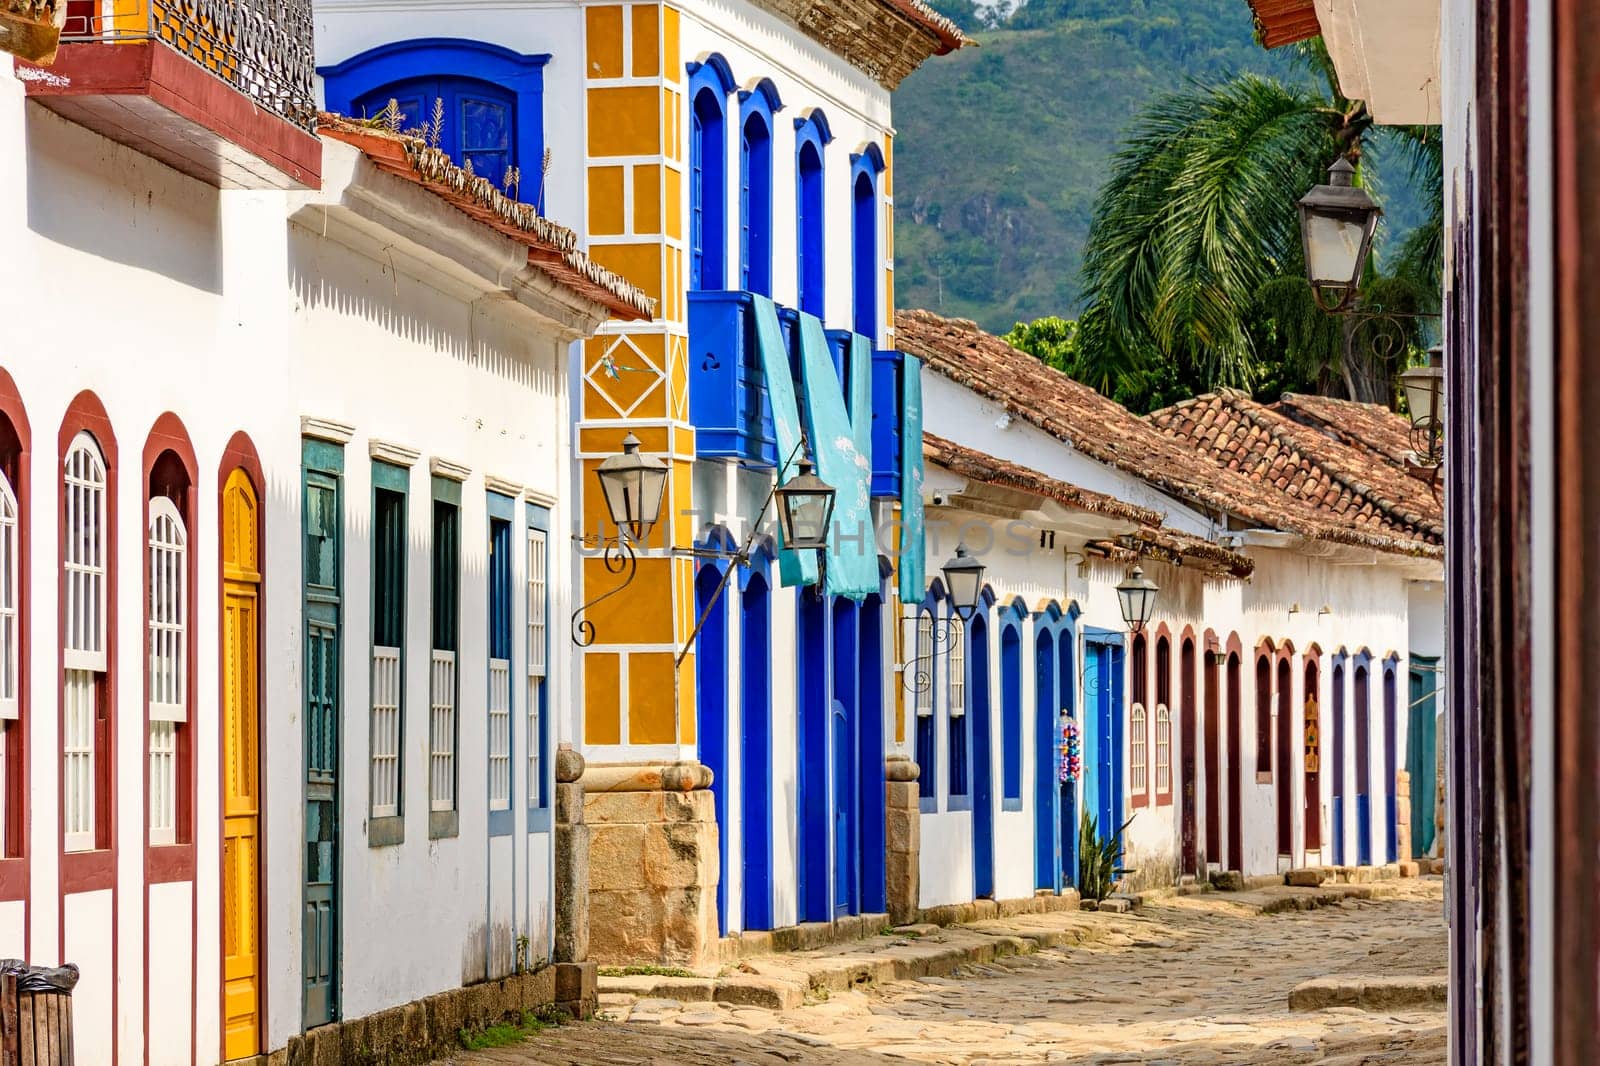 Streets of cobblestone and old houses in colonial style on the streets of the old and historic city of Paraty founded in the 17th century on the coast of the state of Rio de Janeiro, Brazil